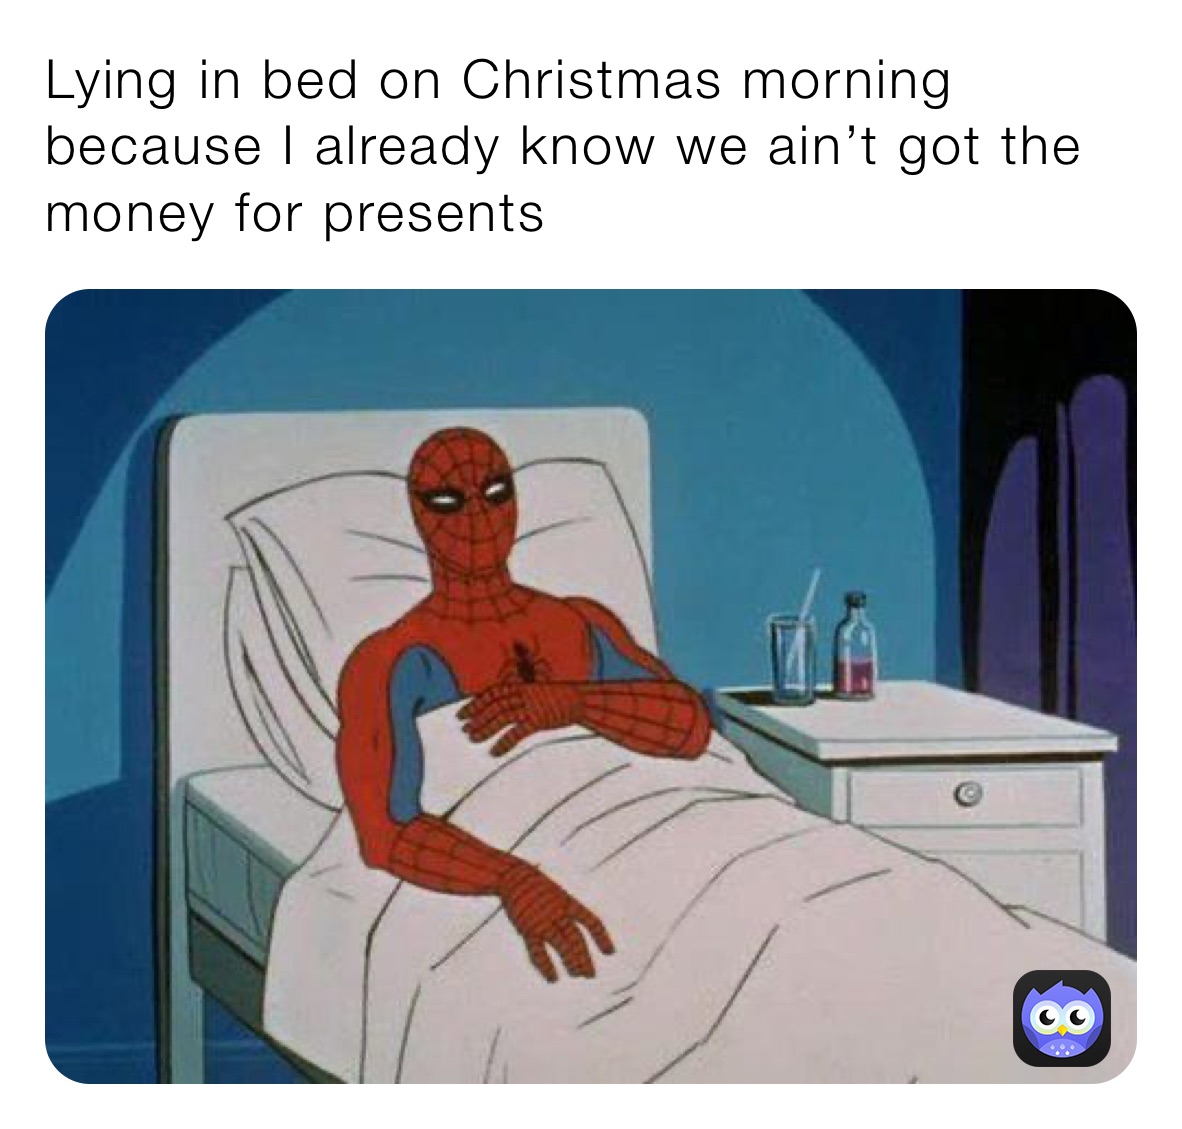 Lying in bed on Christmas morning because I already know we ain’t got the money for presents